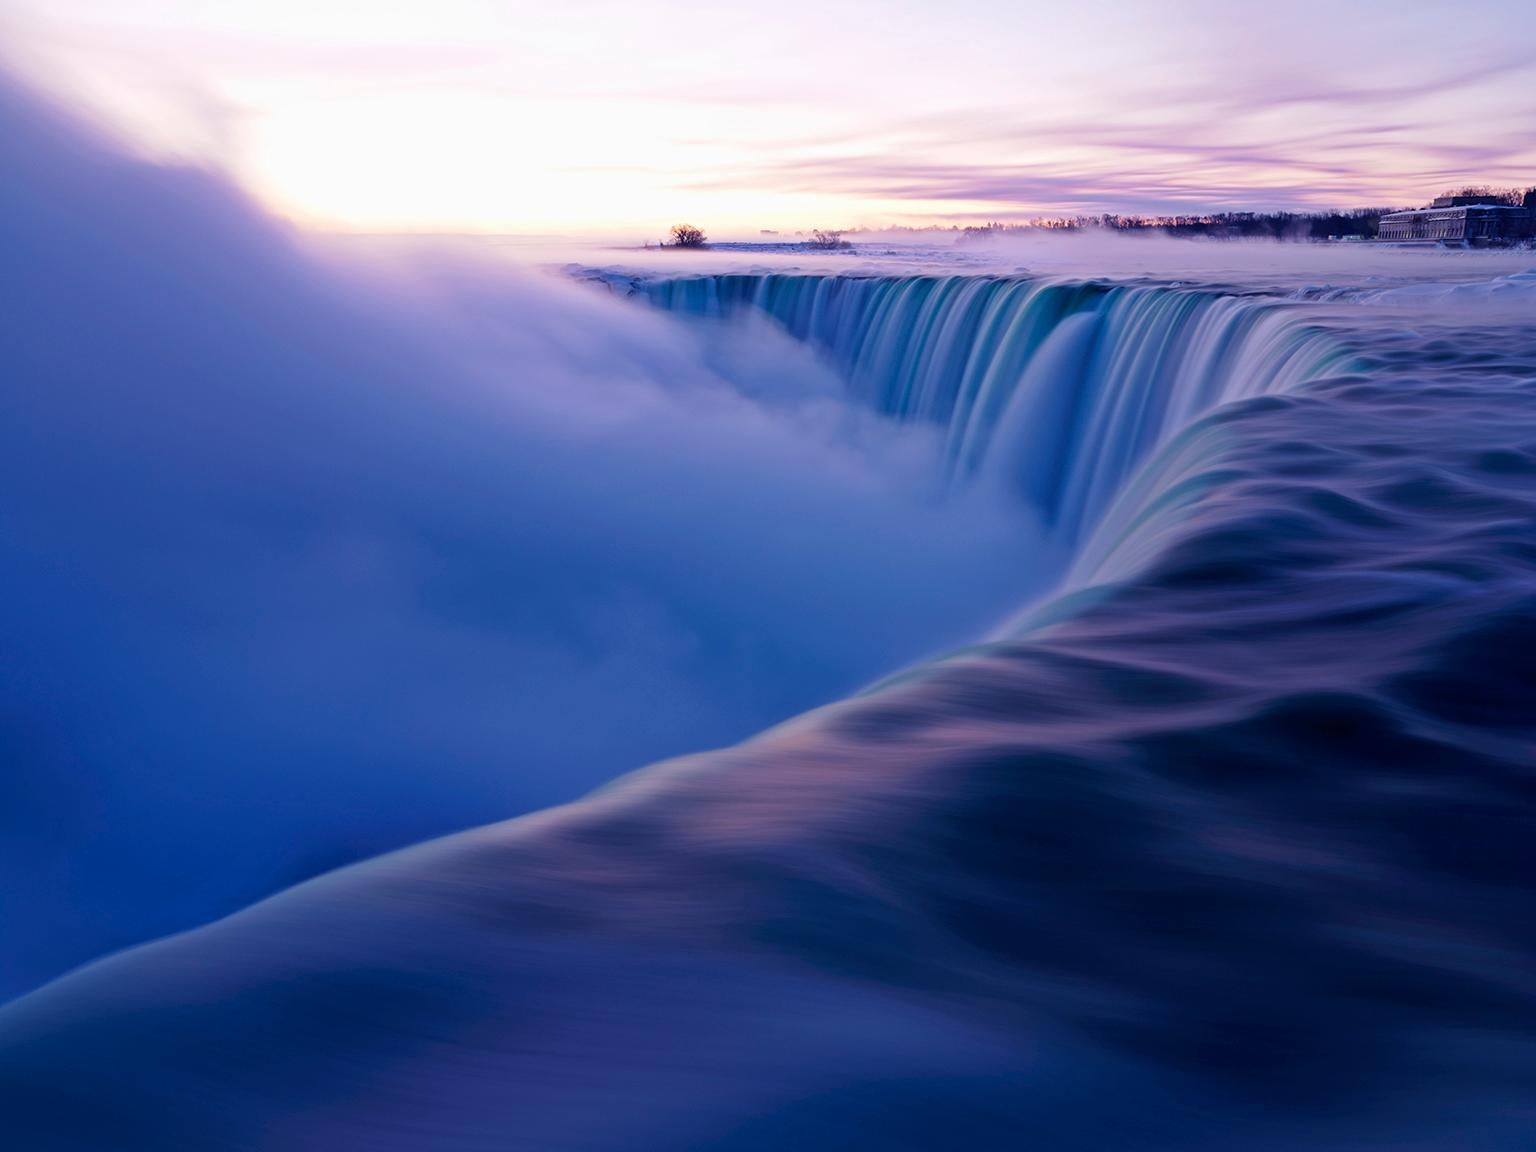 Niagara Falls, Ontario, Canada. photographed in winter at dawn with a long exposure. 2007, 
Archival Pigment Print, Edition of 10.
Cosmo Condina’s photographs are wonderfully simple, graphic and elegant.